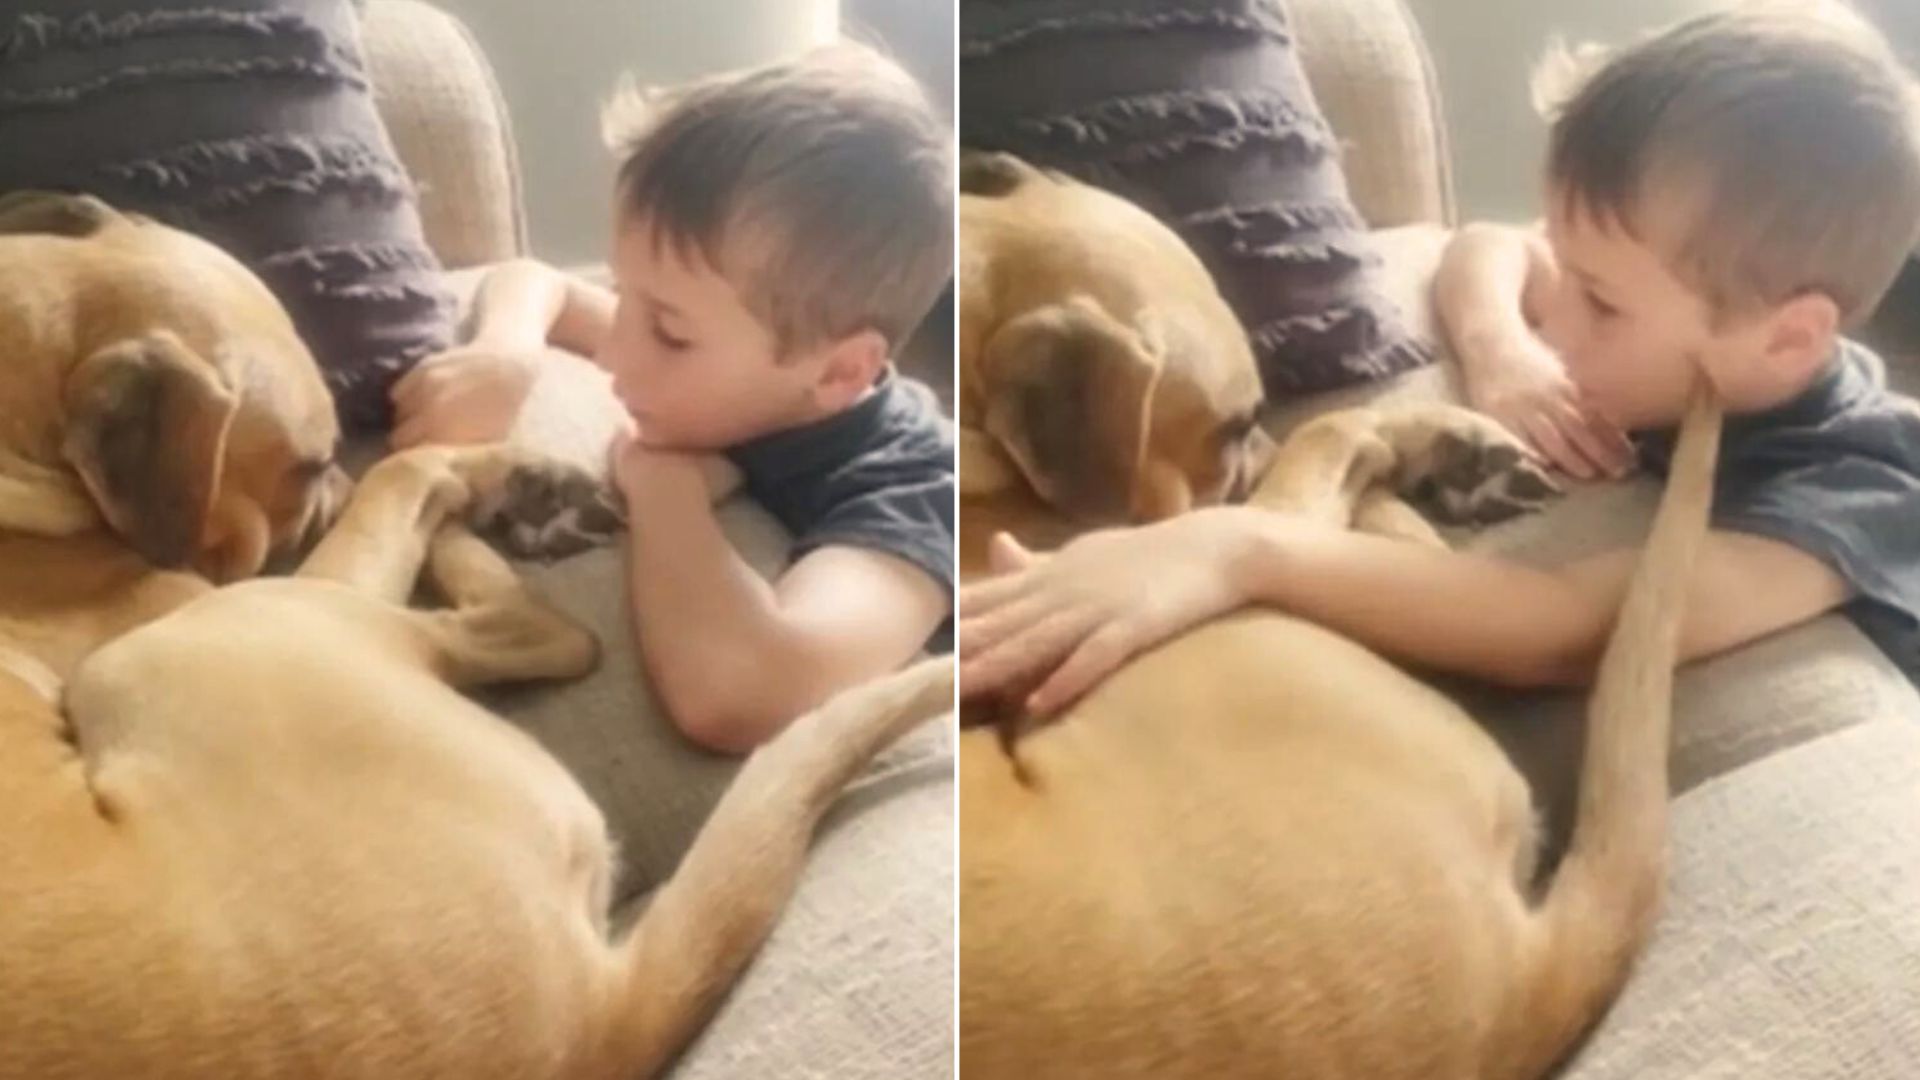 7-Year-Old Boy Reassures His Traumatized Rescue Dog That He Is ‘Loved So Much’